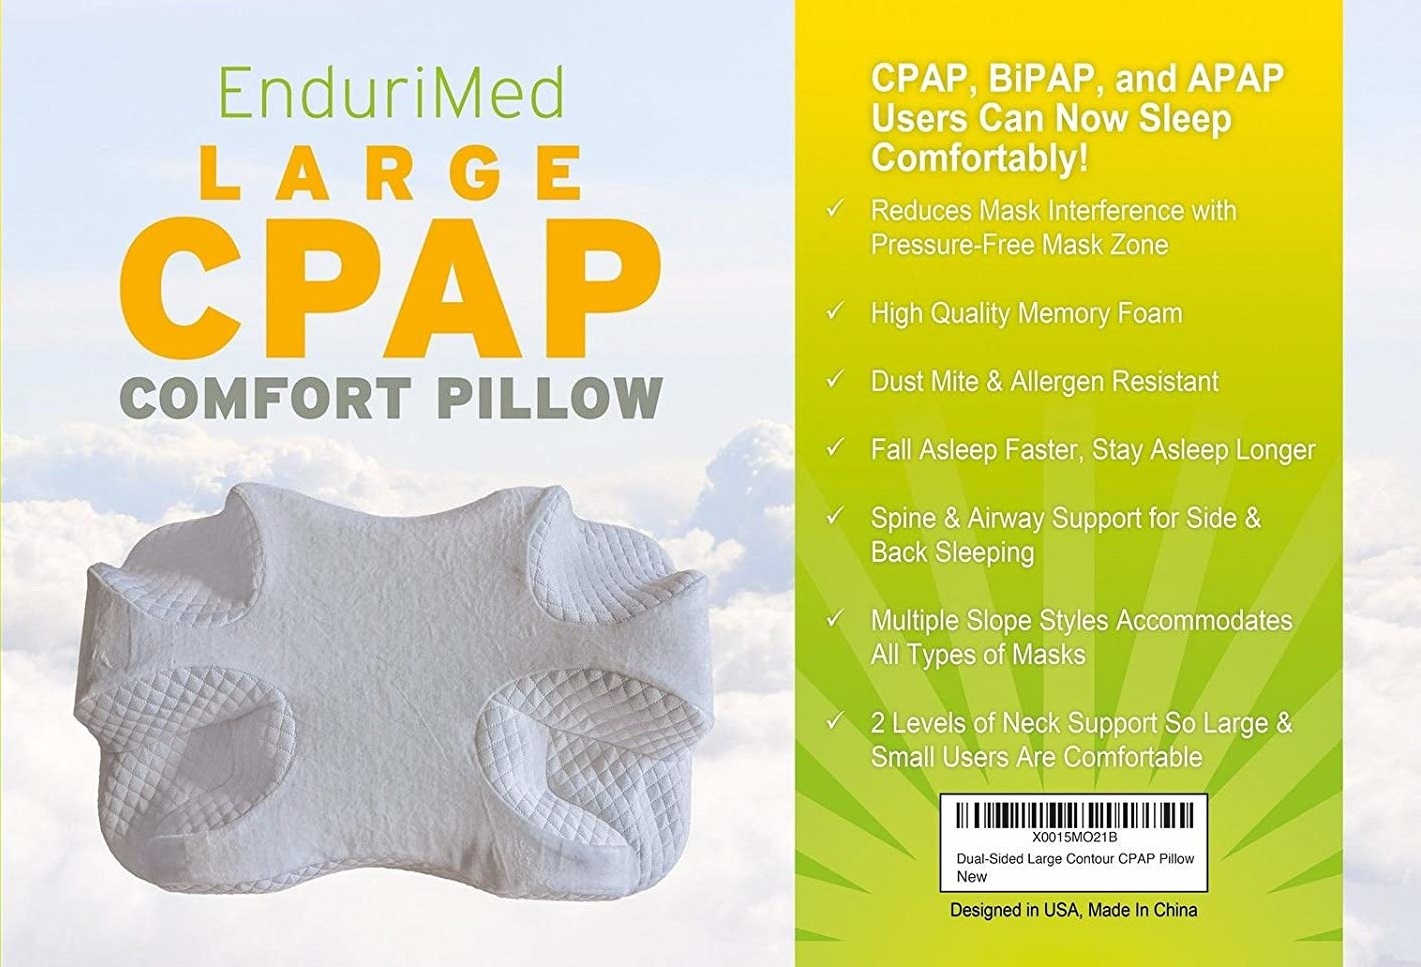 infographic about the CPAP pillow from Endurimed